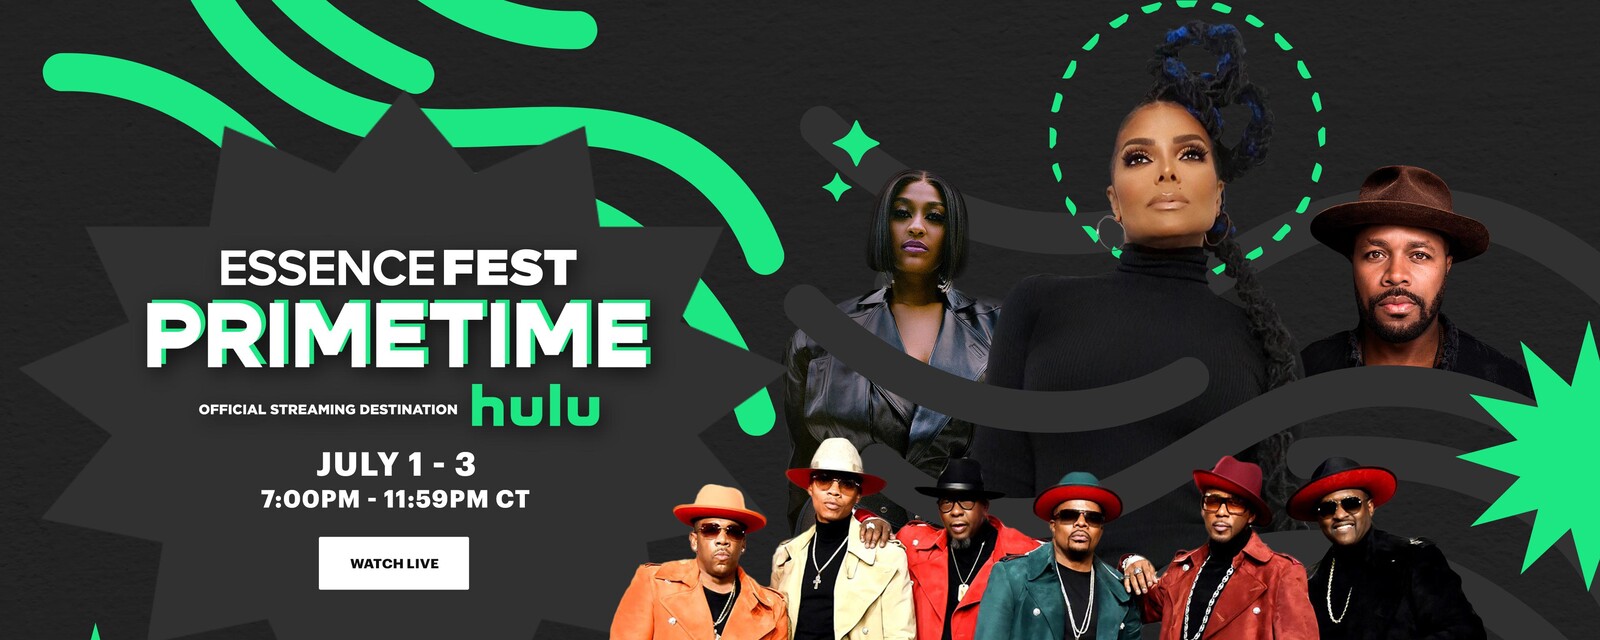 Hulu Is the Essence Fest Primetime Official Streaming Destination for 2022 Whats On Hulu